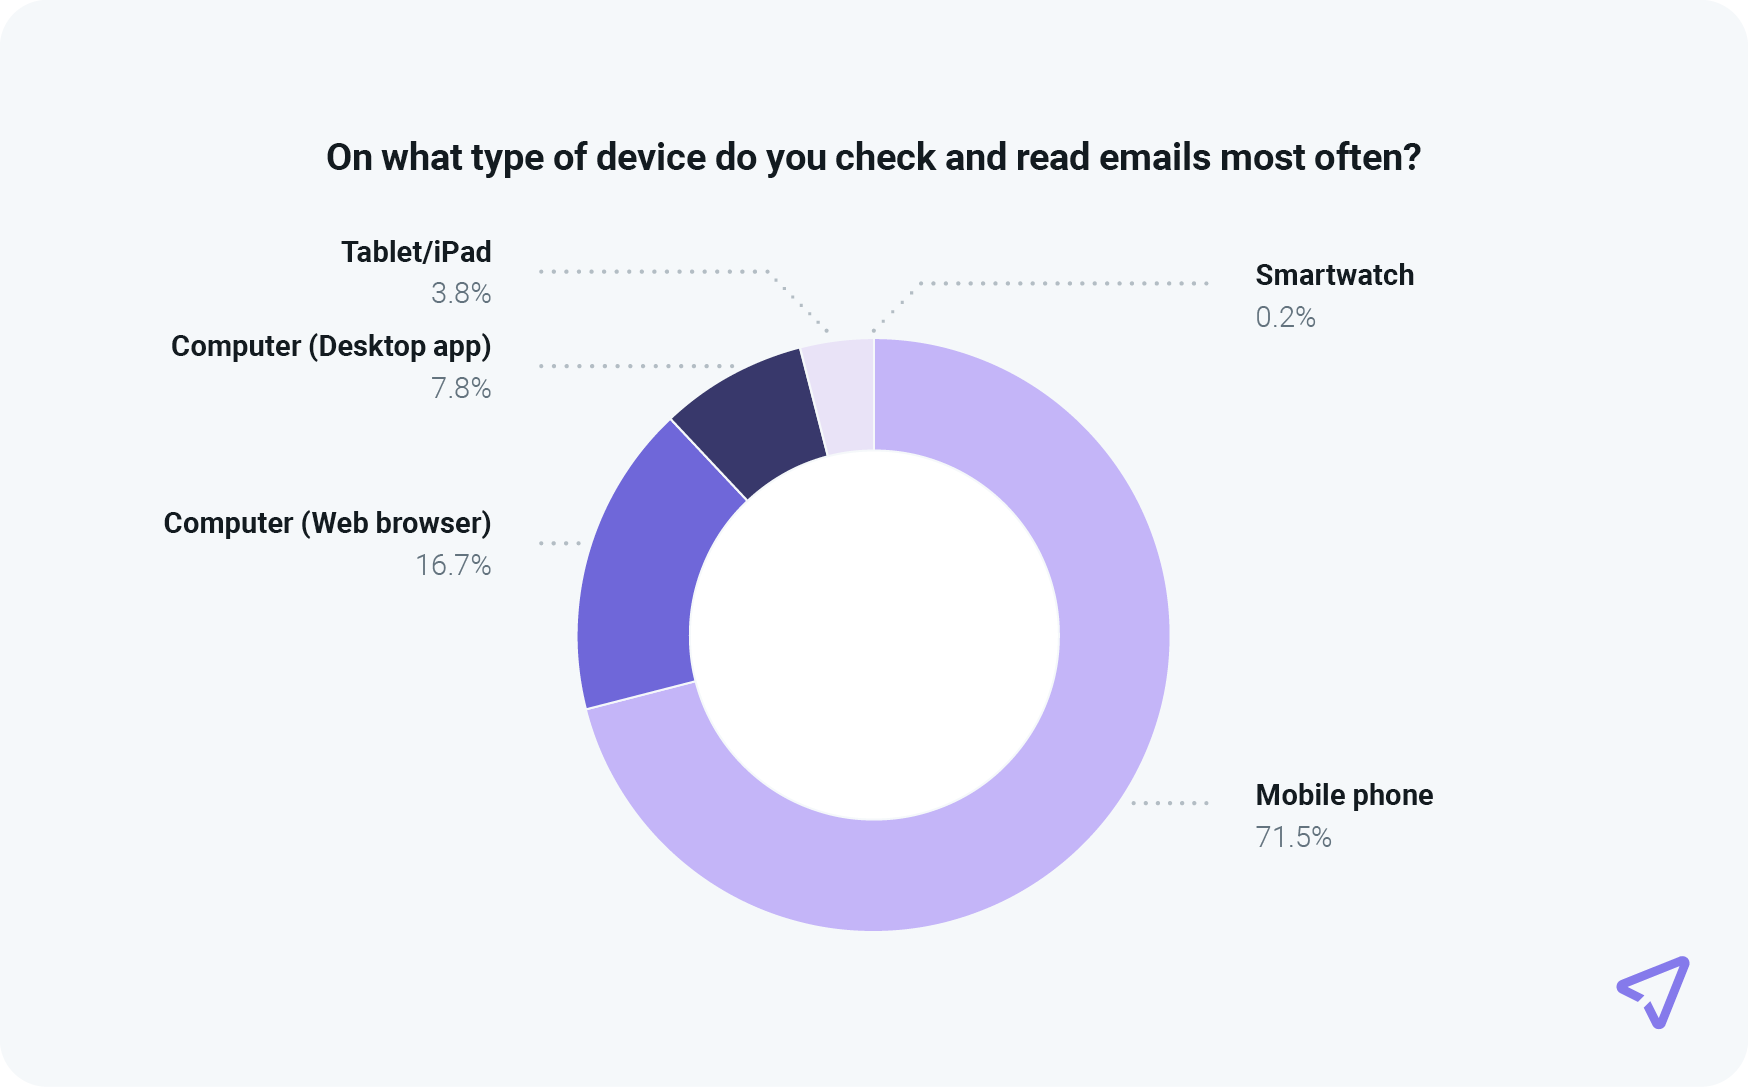 Chart shows 71.5% of consumers view email on a mobile phone